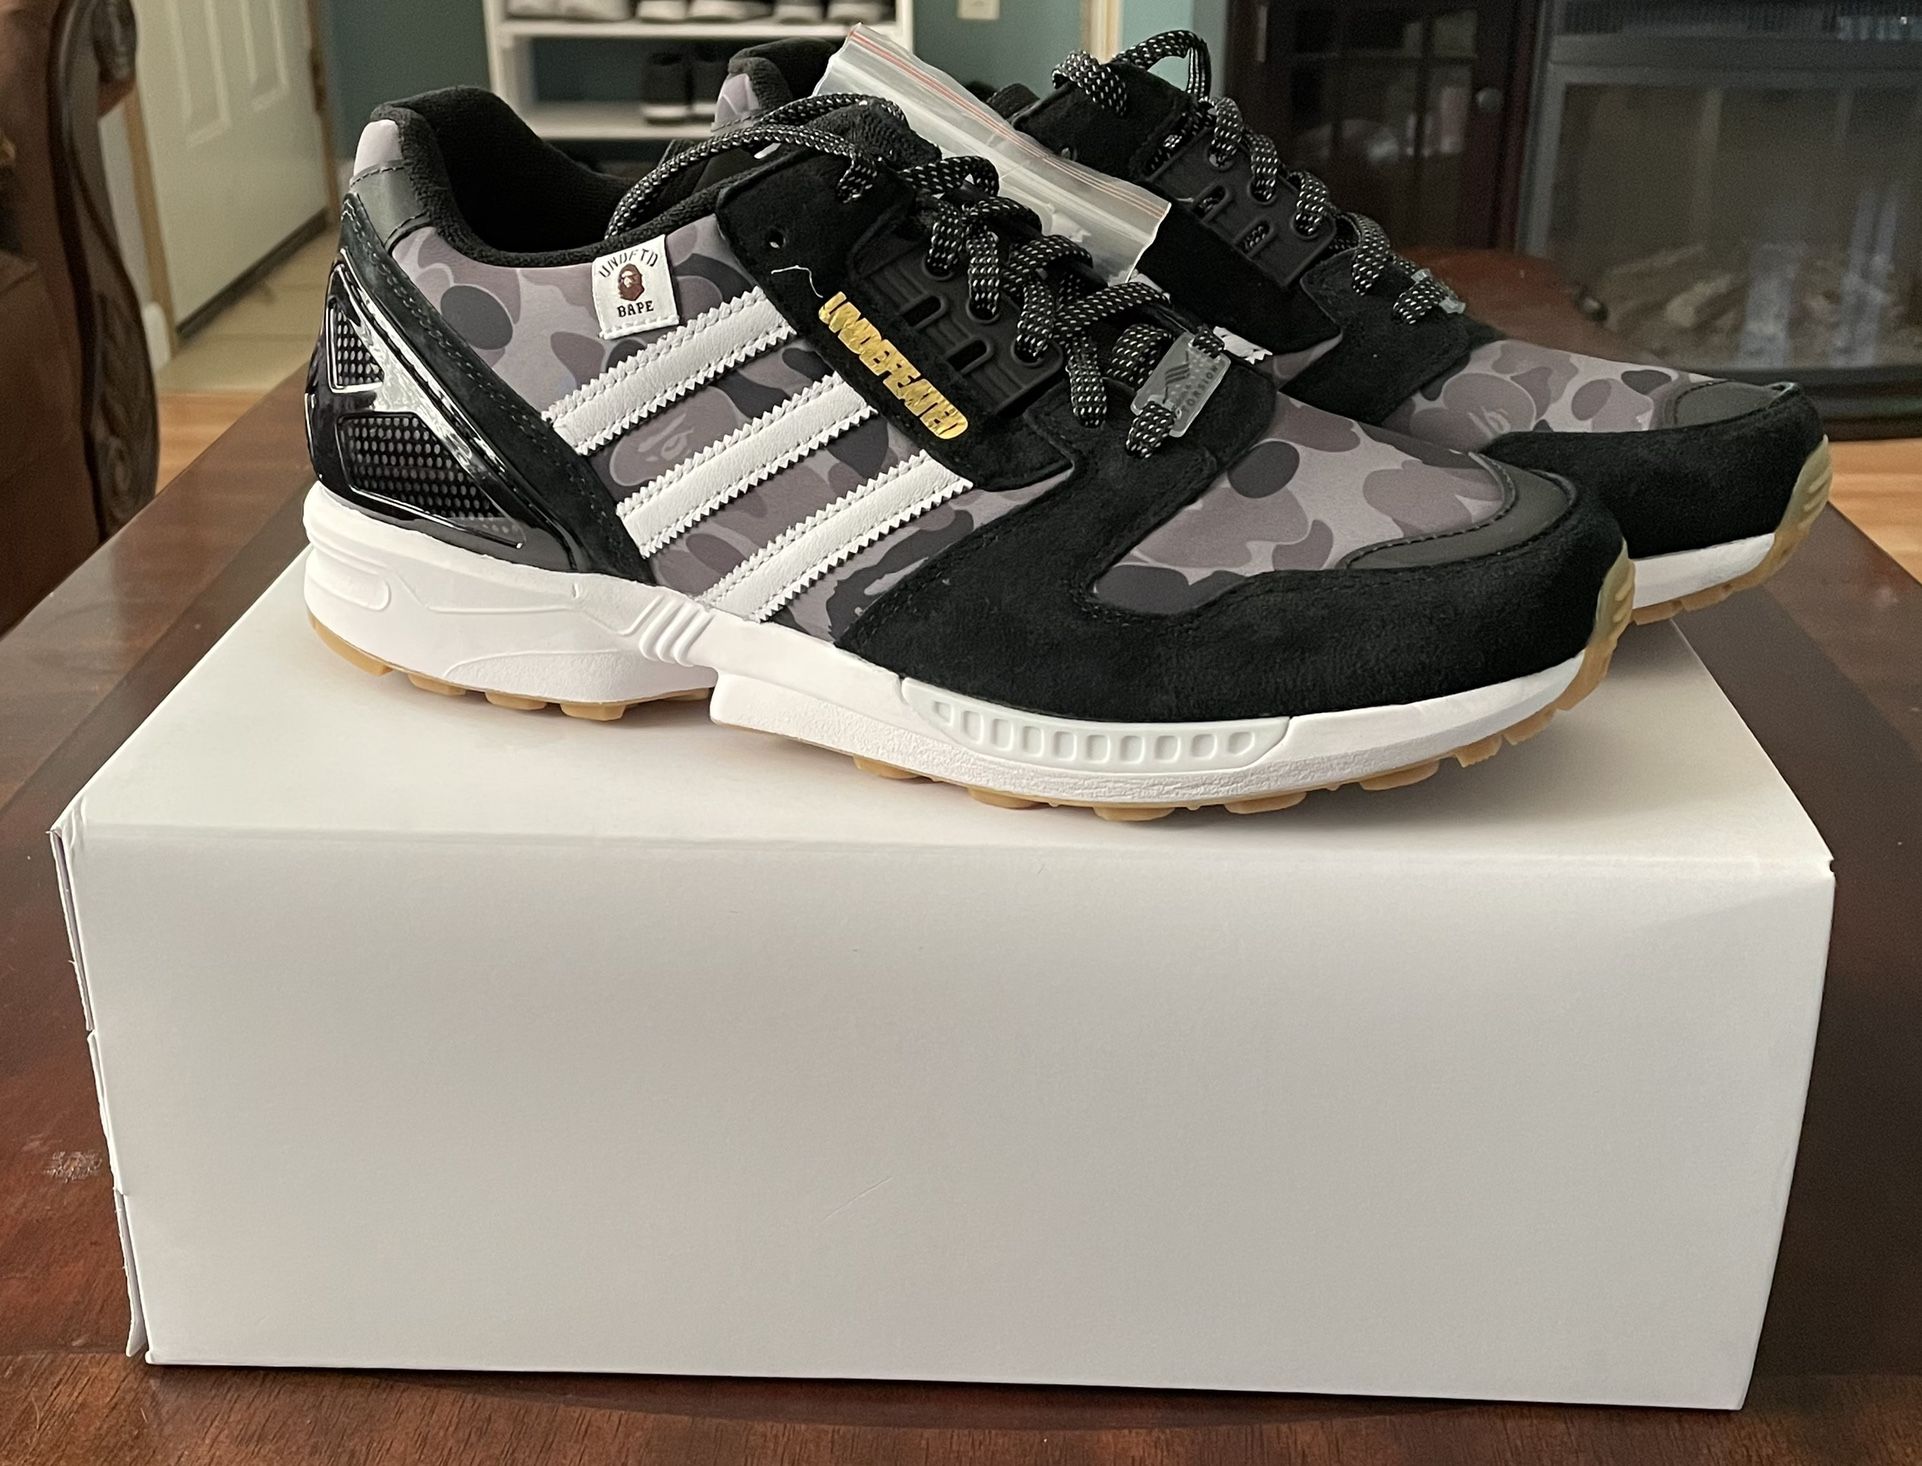 Brand New Adidas x A Bathing Ape (Bape) x Undefeated ZX 8000 Black Colorway Size 9.5 US Mens